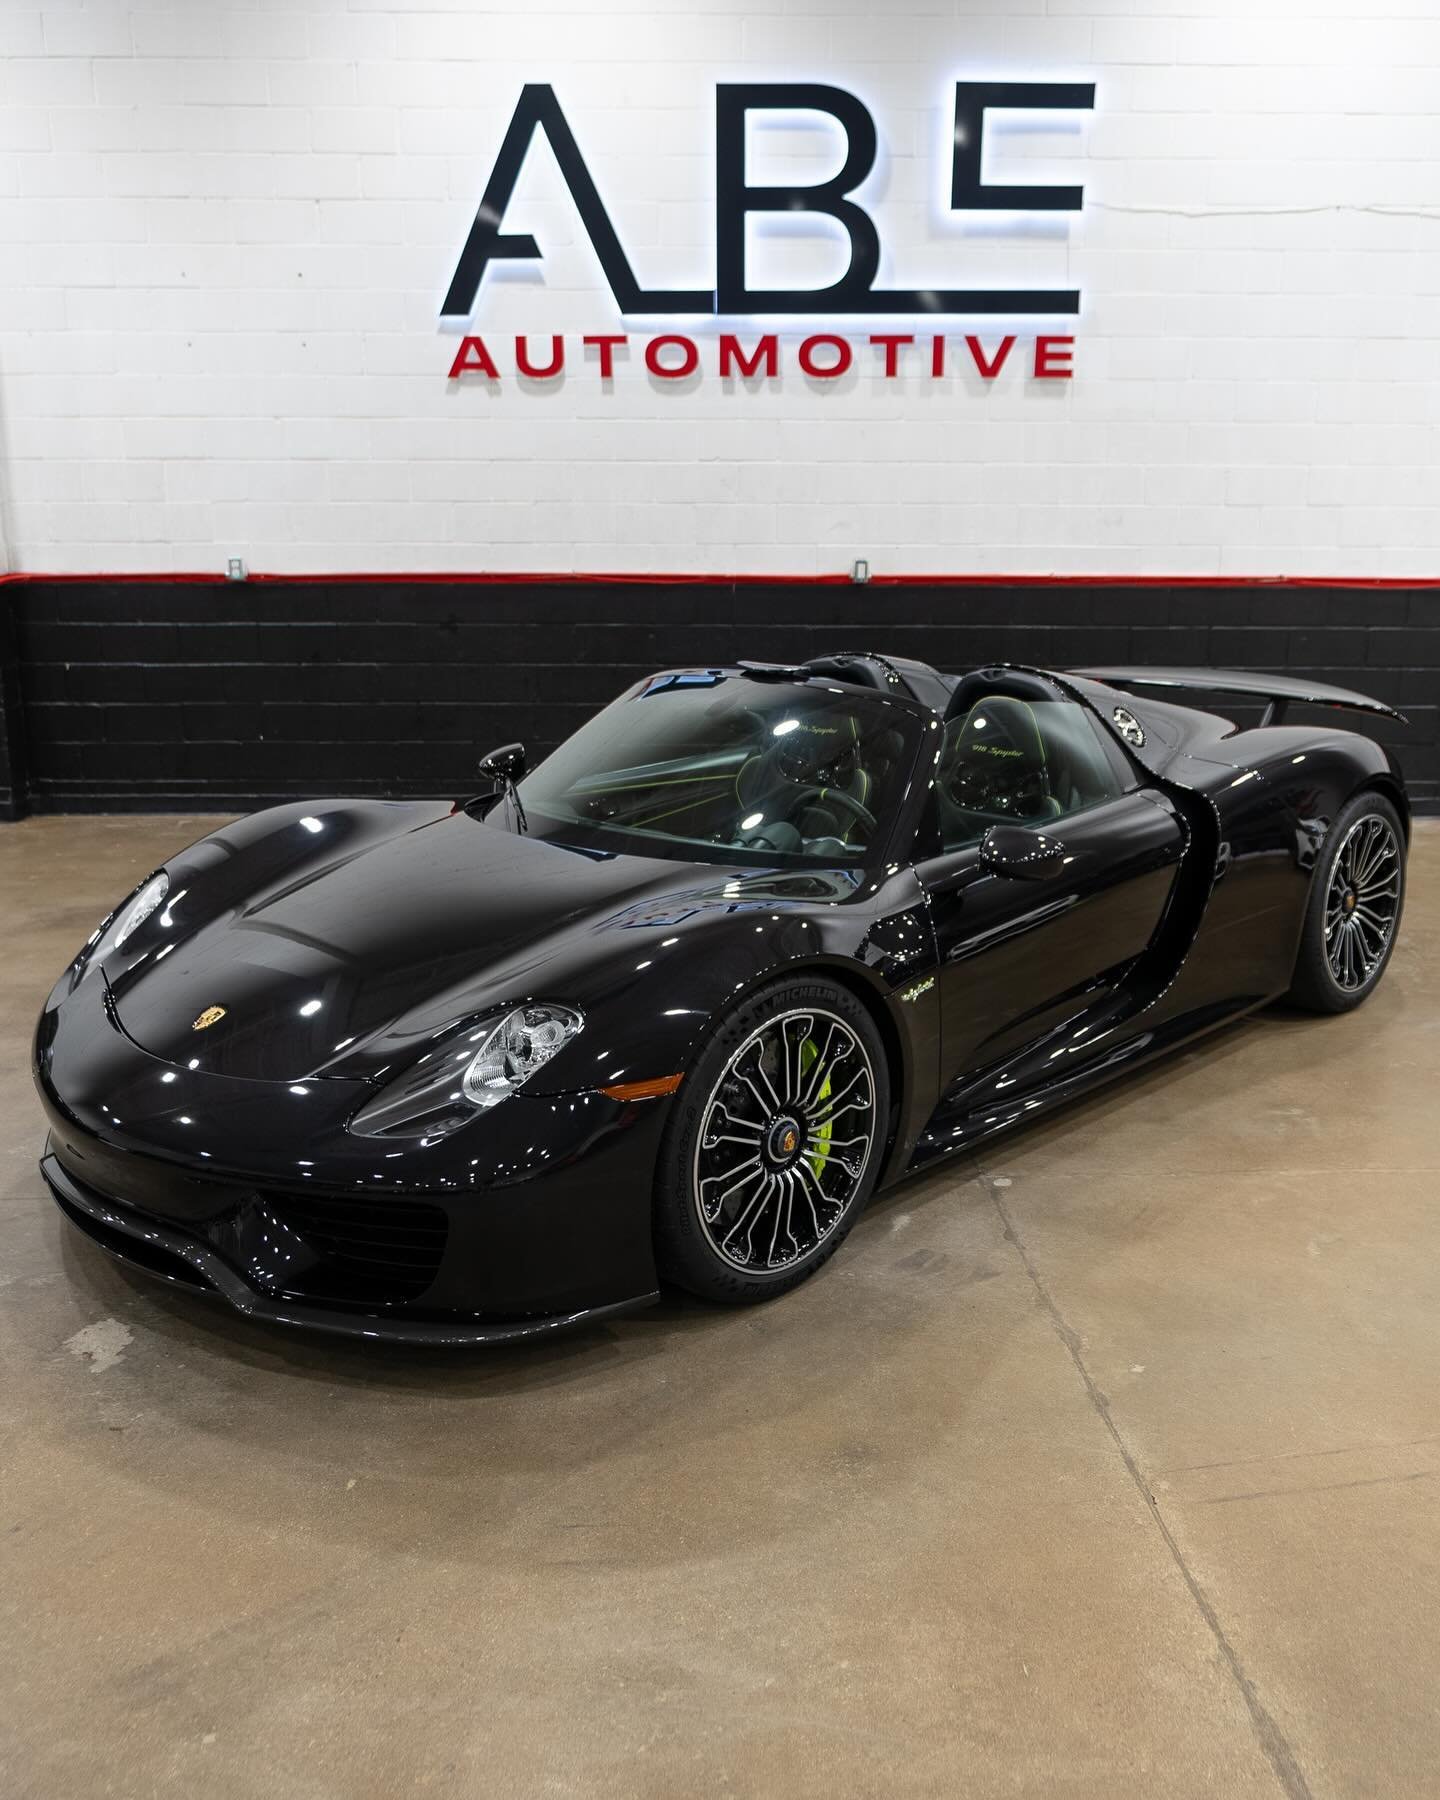 One of the &ldquo;Holy Trinity&rdquo; of Hypercars 🔥 Our second one in the books, this Porsche 918 Spyder left our shop sealed top to bottom in Paint Protection Film &amp; Ceramic Coating. As always we made sure there were minimal seams and maximum 